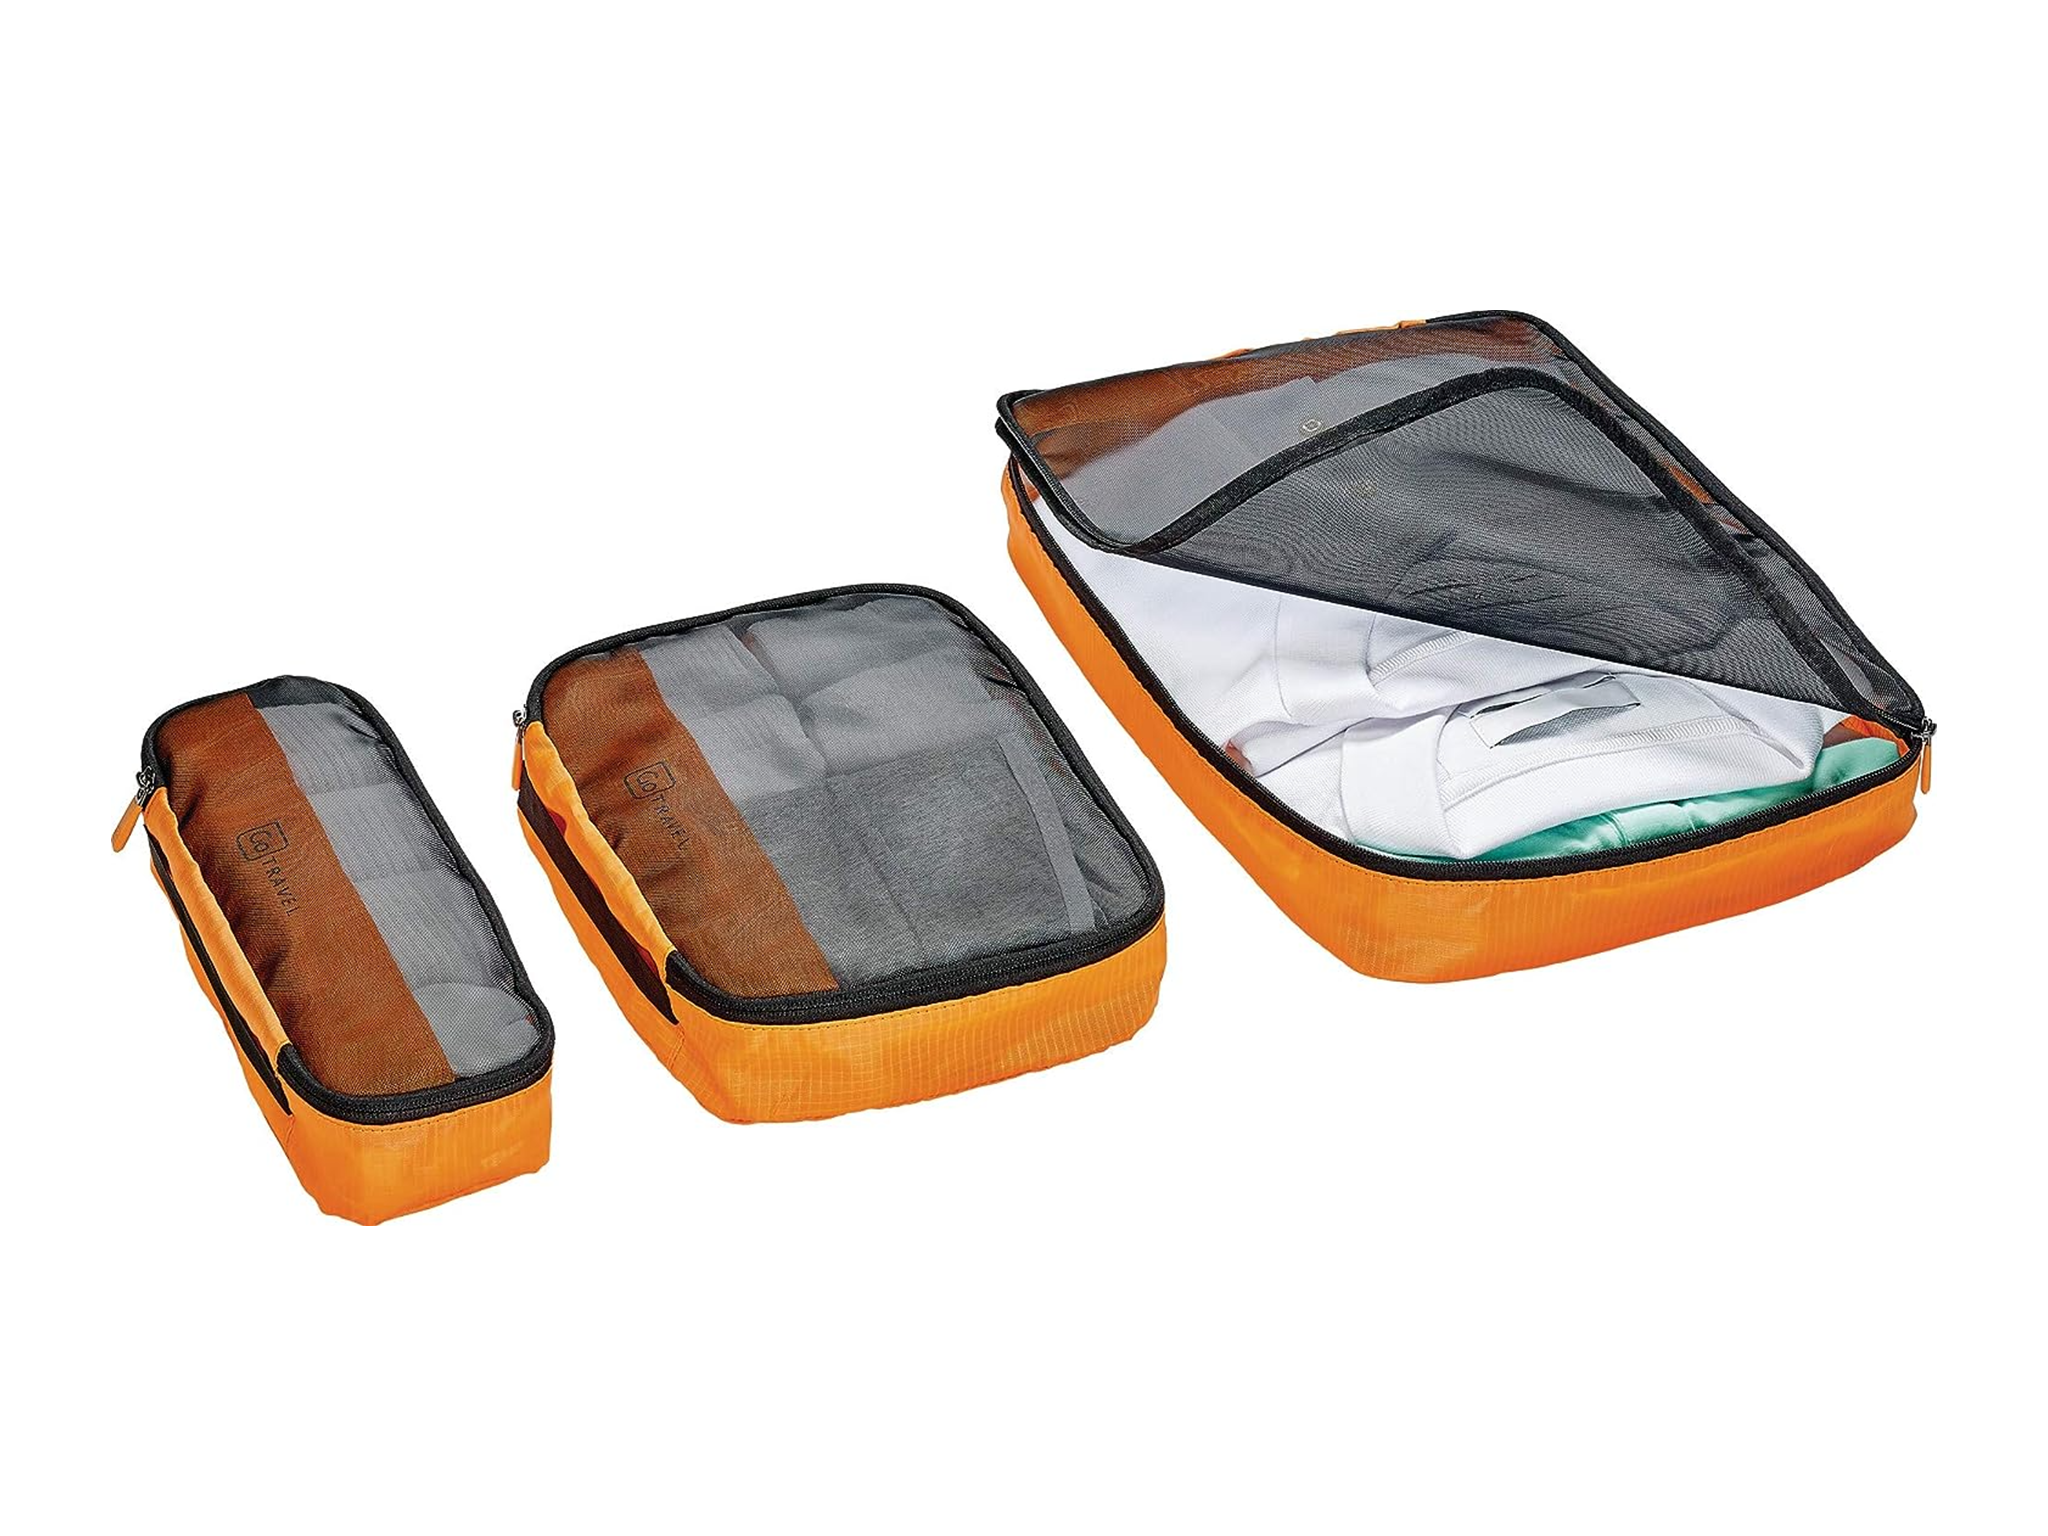 Go Travel packing cubes